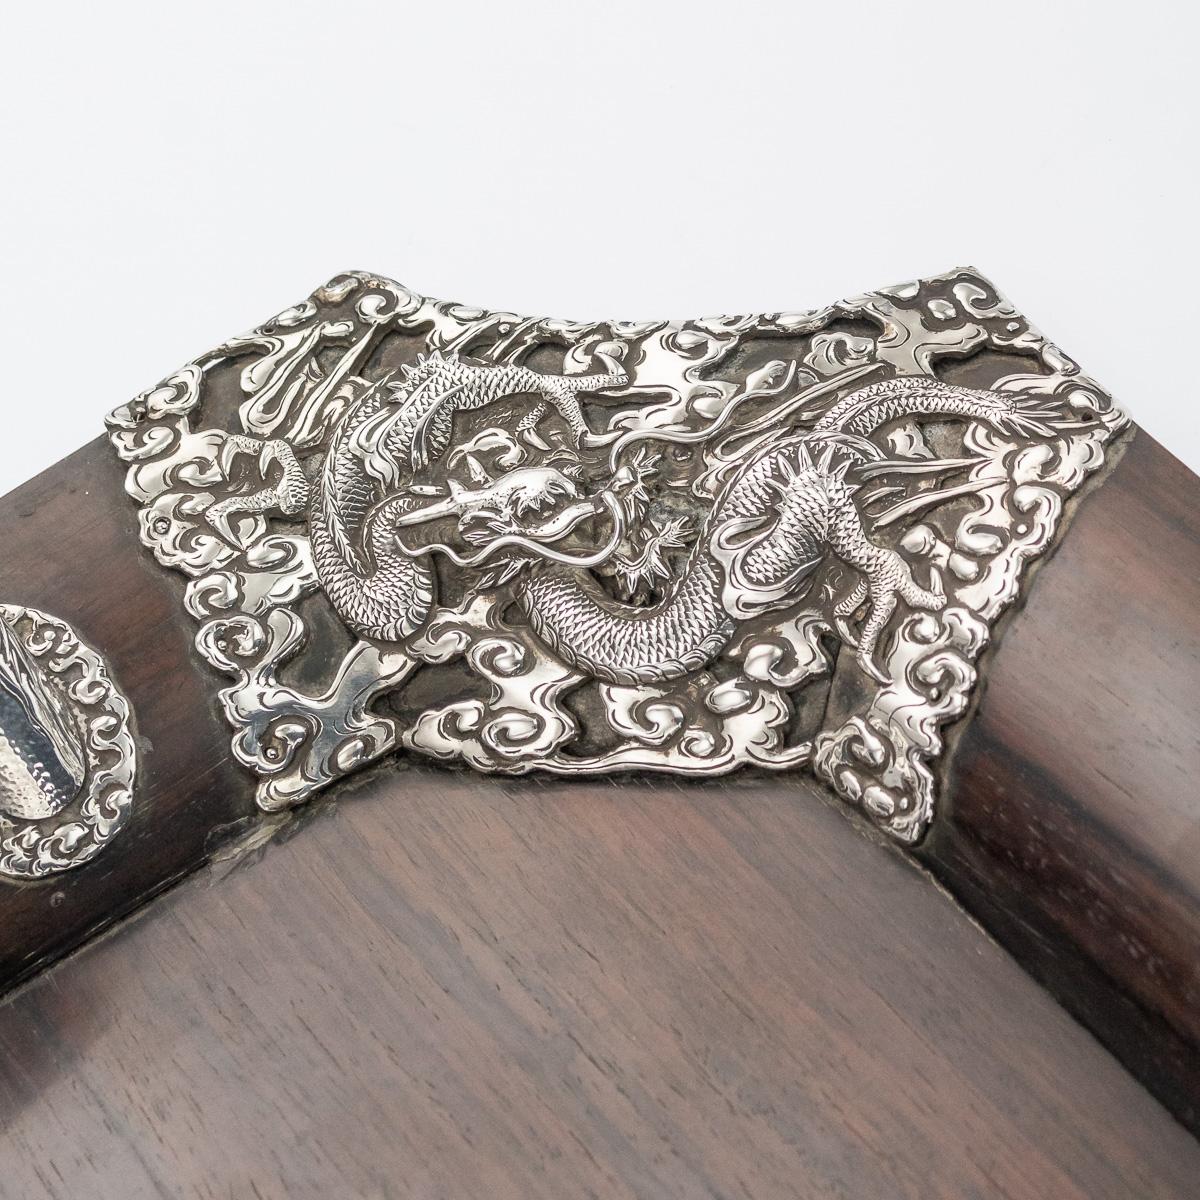 20th Century Japanese Solid Silver on Wood Serving Tray, circa 1900 For Sale 4